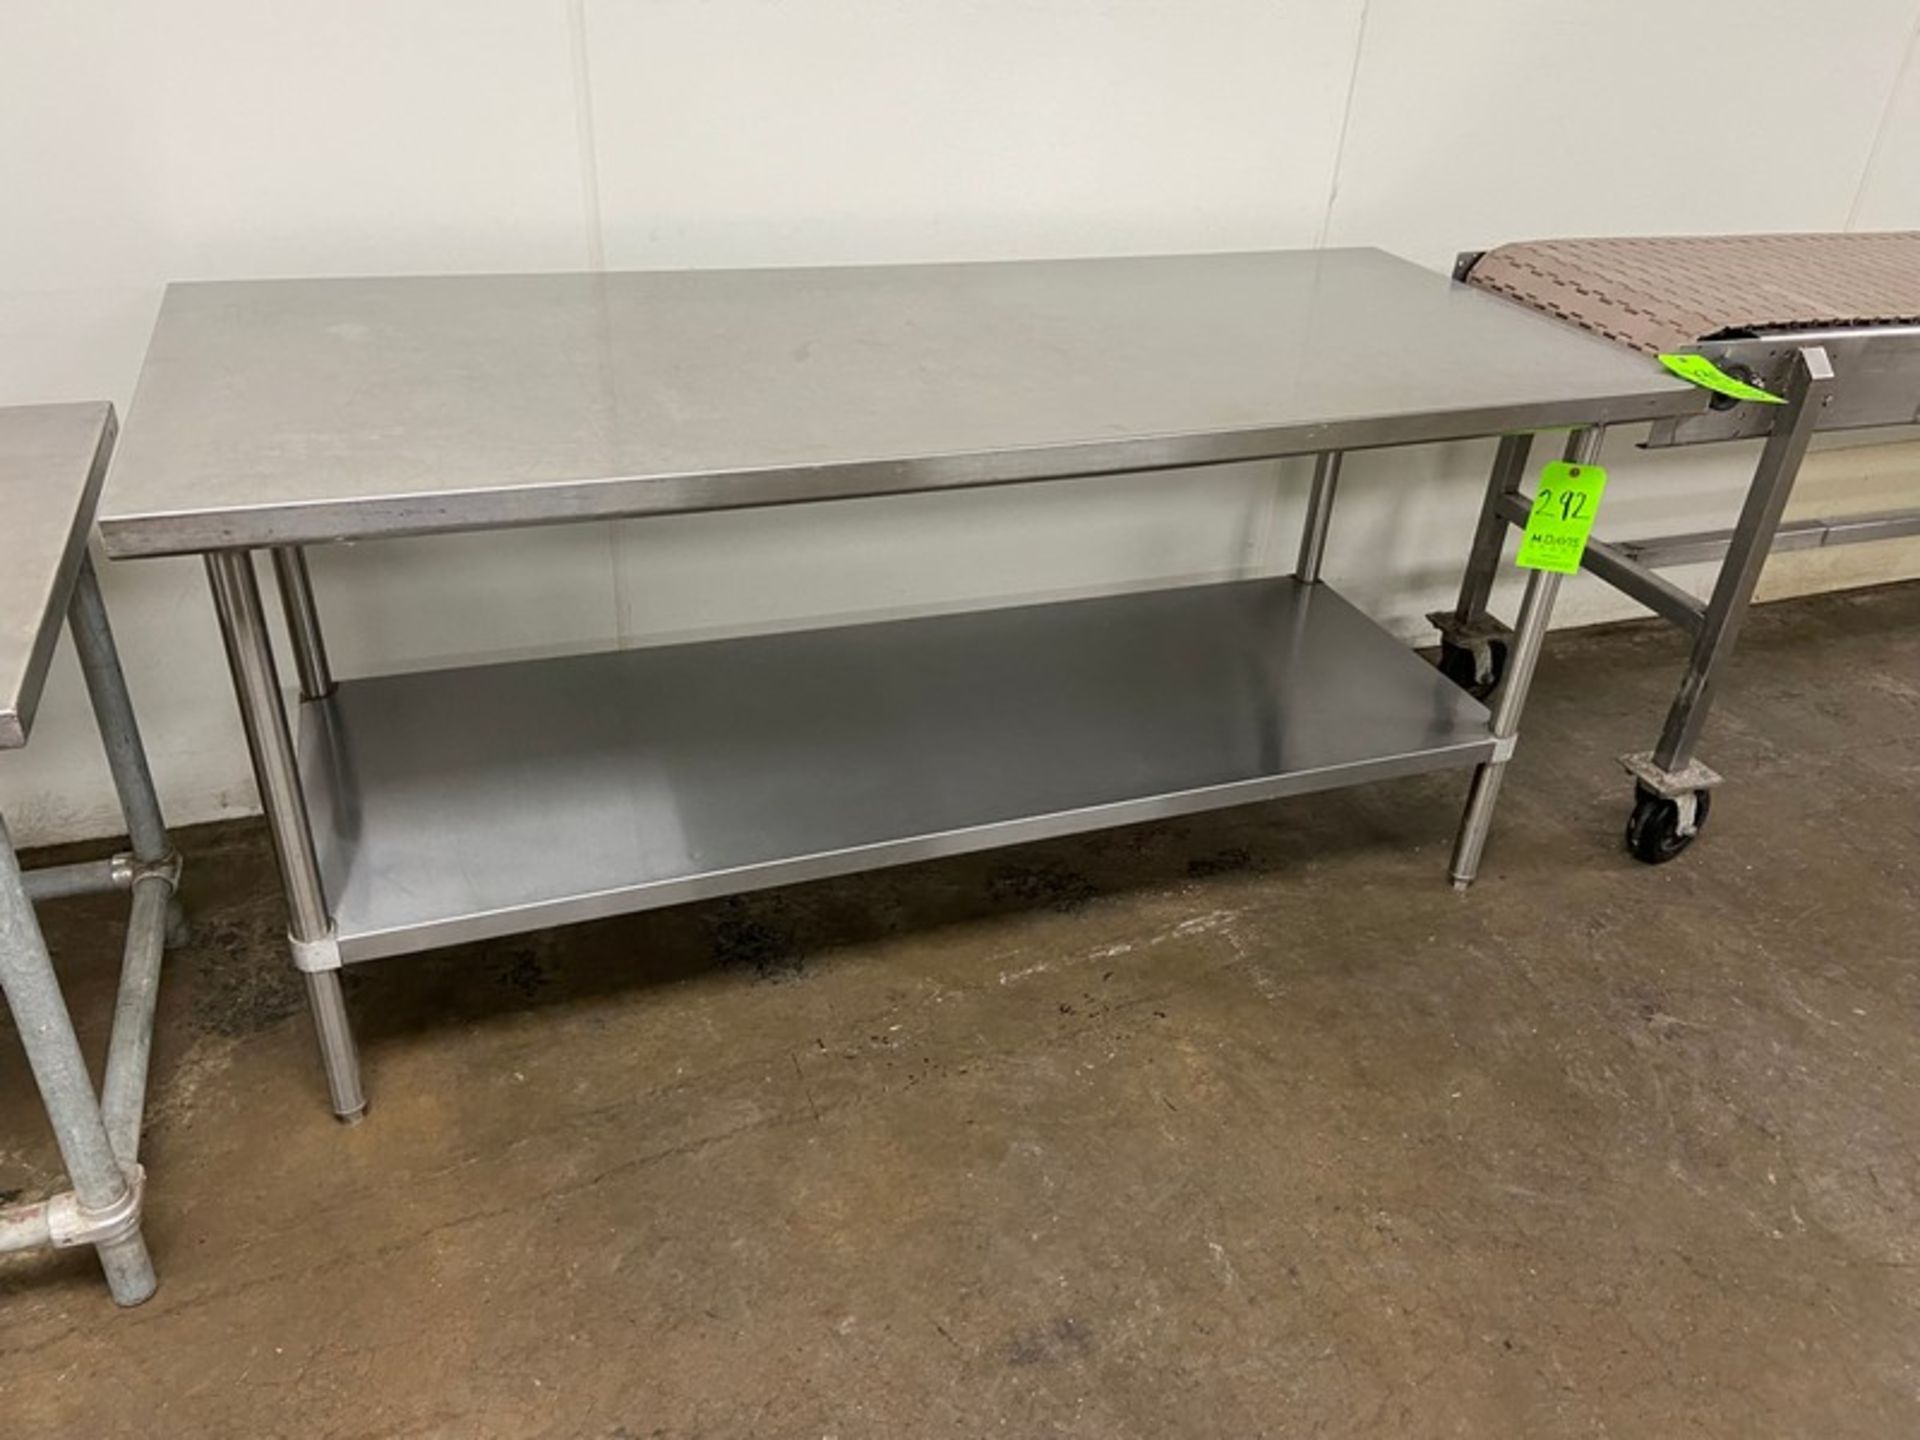 S/S TABLE, OVERALL DIMS.: APROX. 96” L x 30” W x 34” H (LOCATED IN CALLERY, PA) - Image 2 of 2